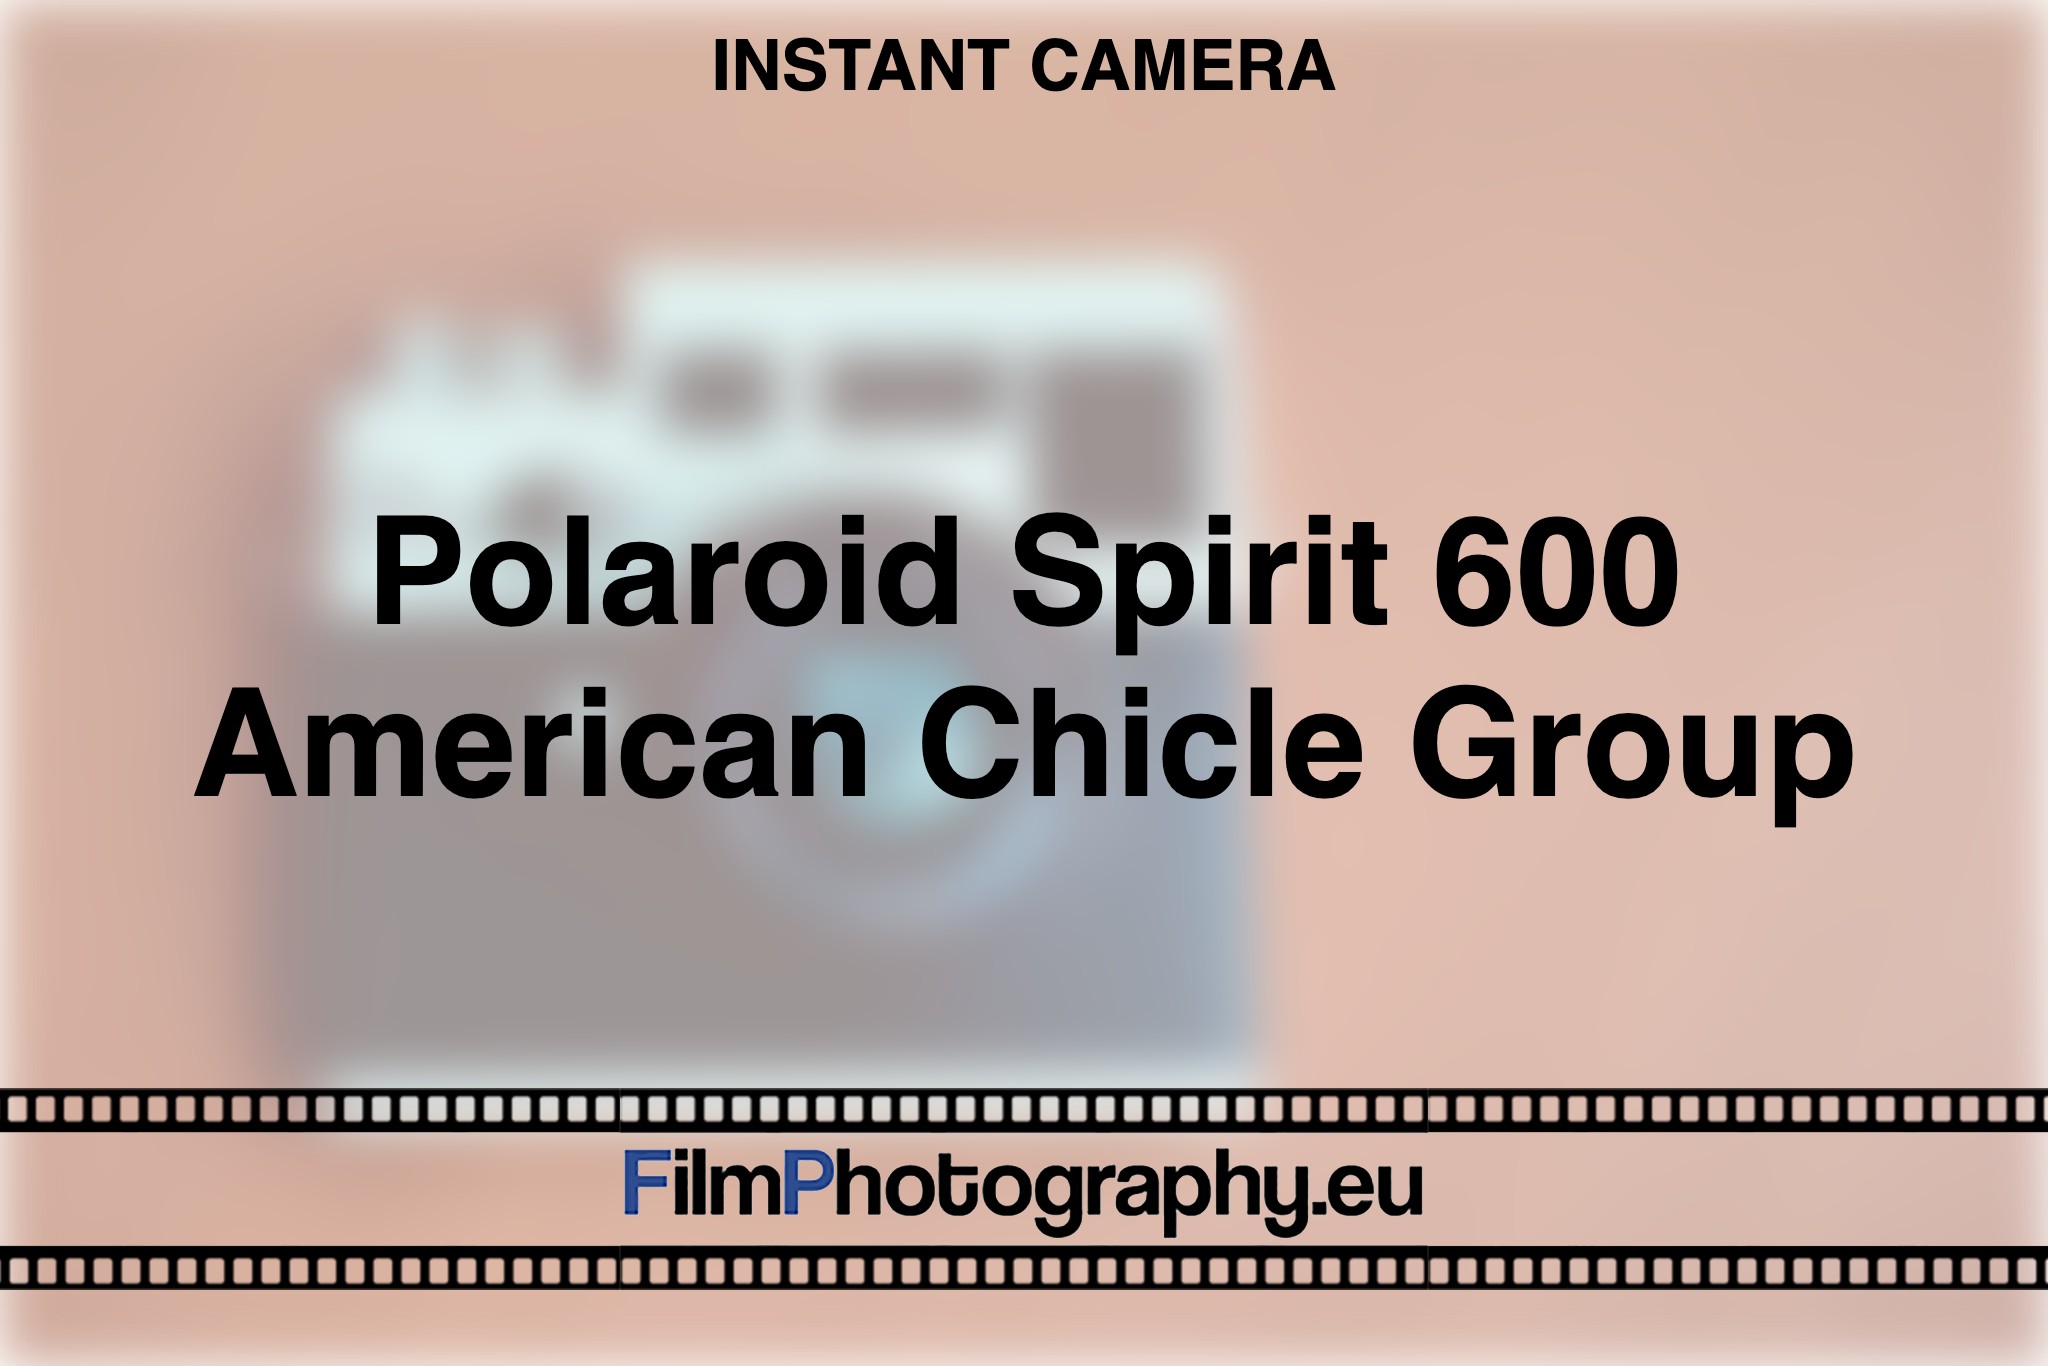 polaroid-spirit-600-american-chicle-group-instant-camera-bnv